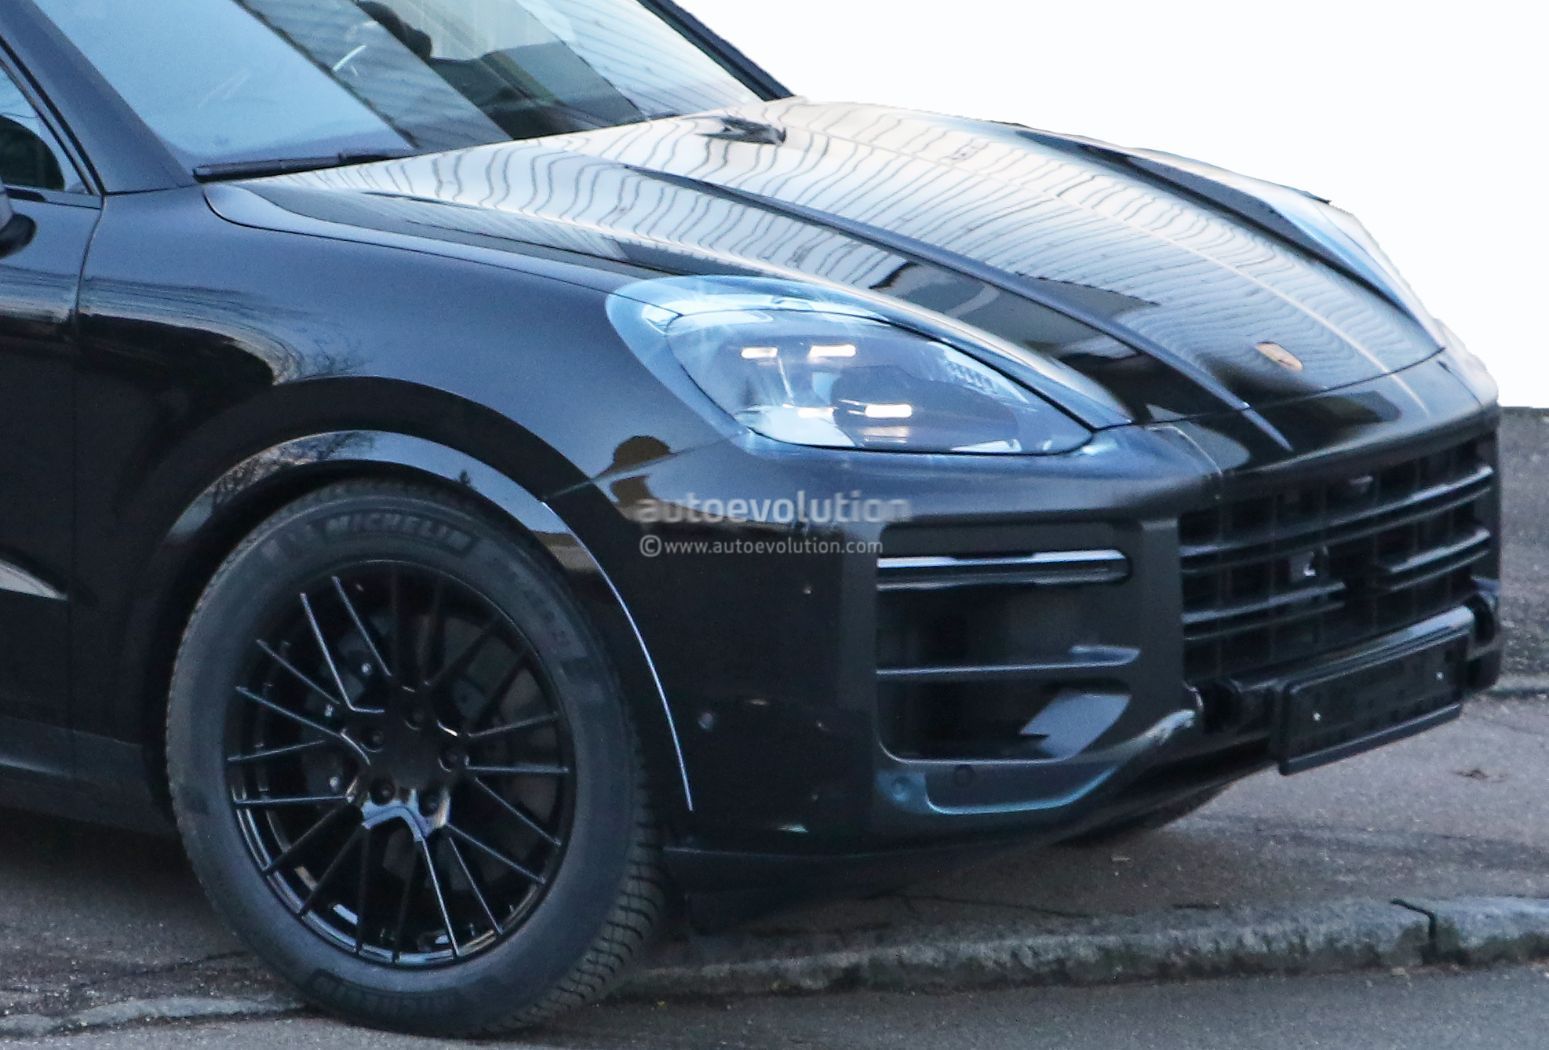 2022 Porsche Cayenne Facelift Prototype Shows New Front and Rear Design